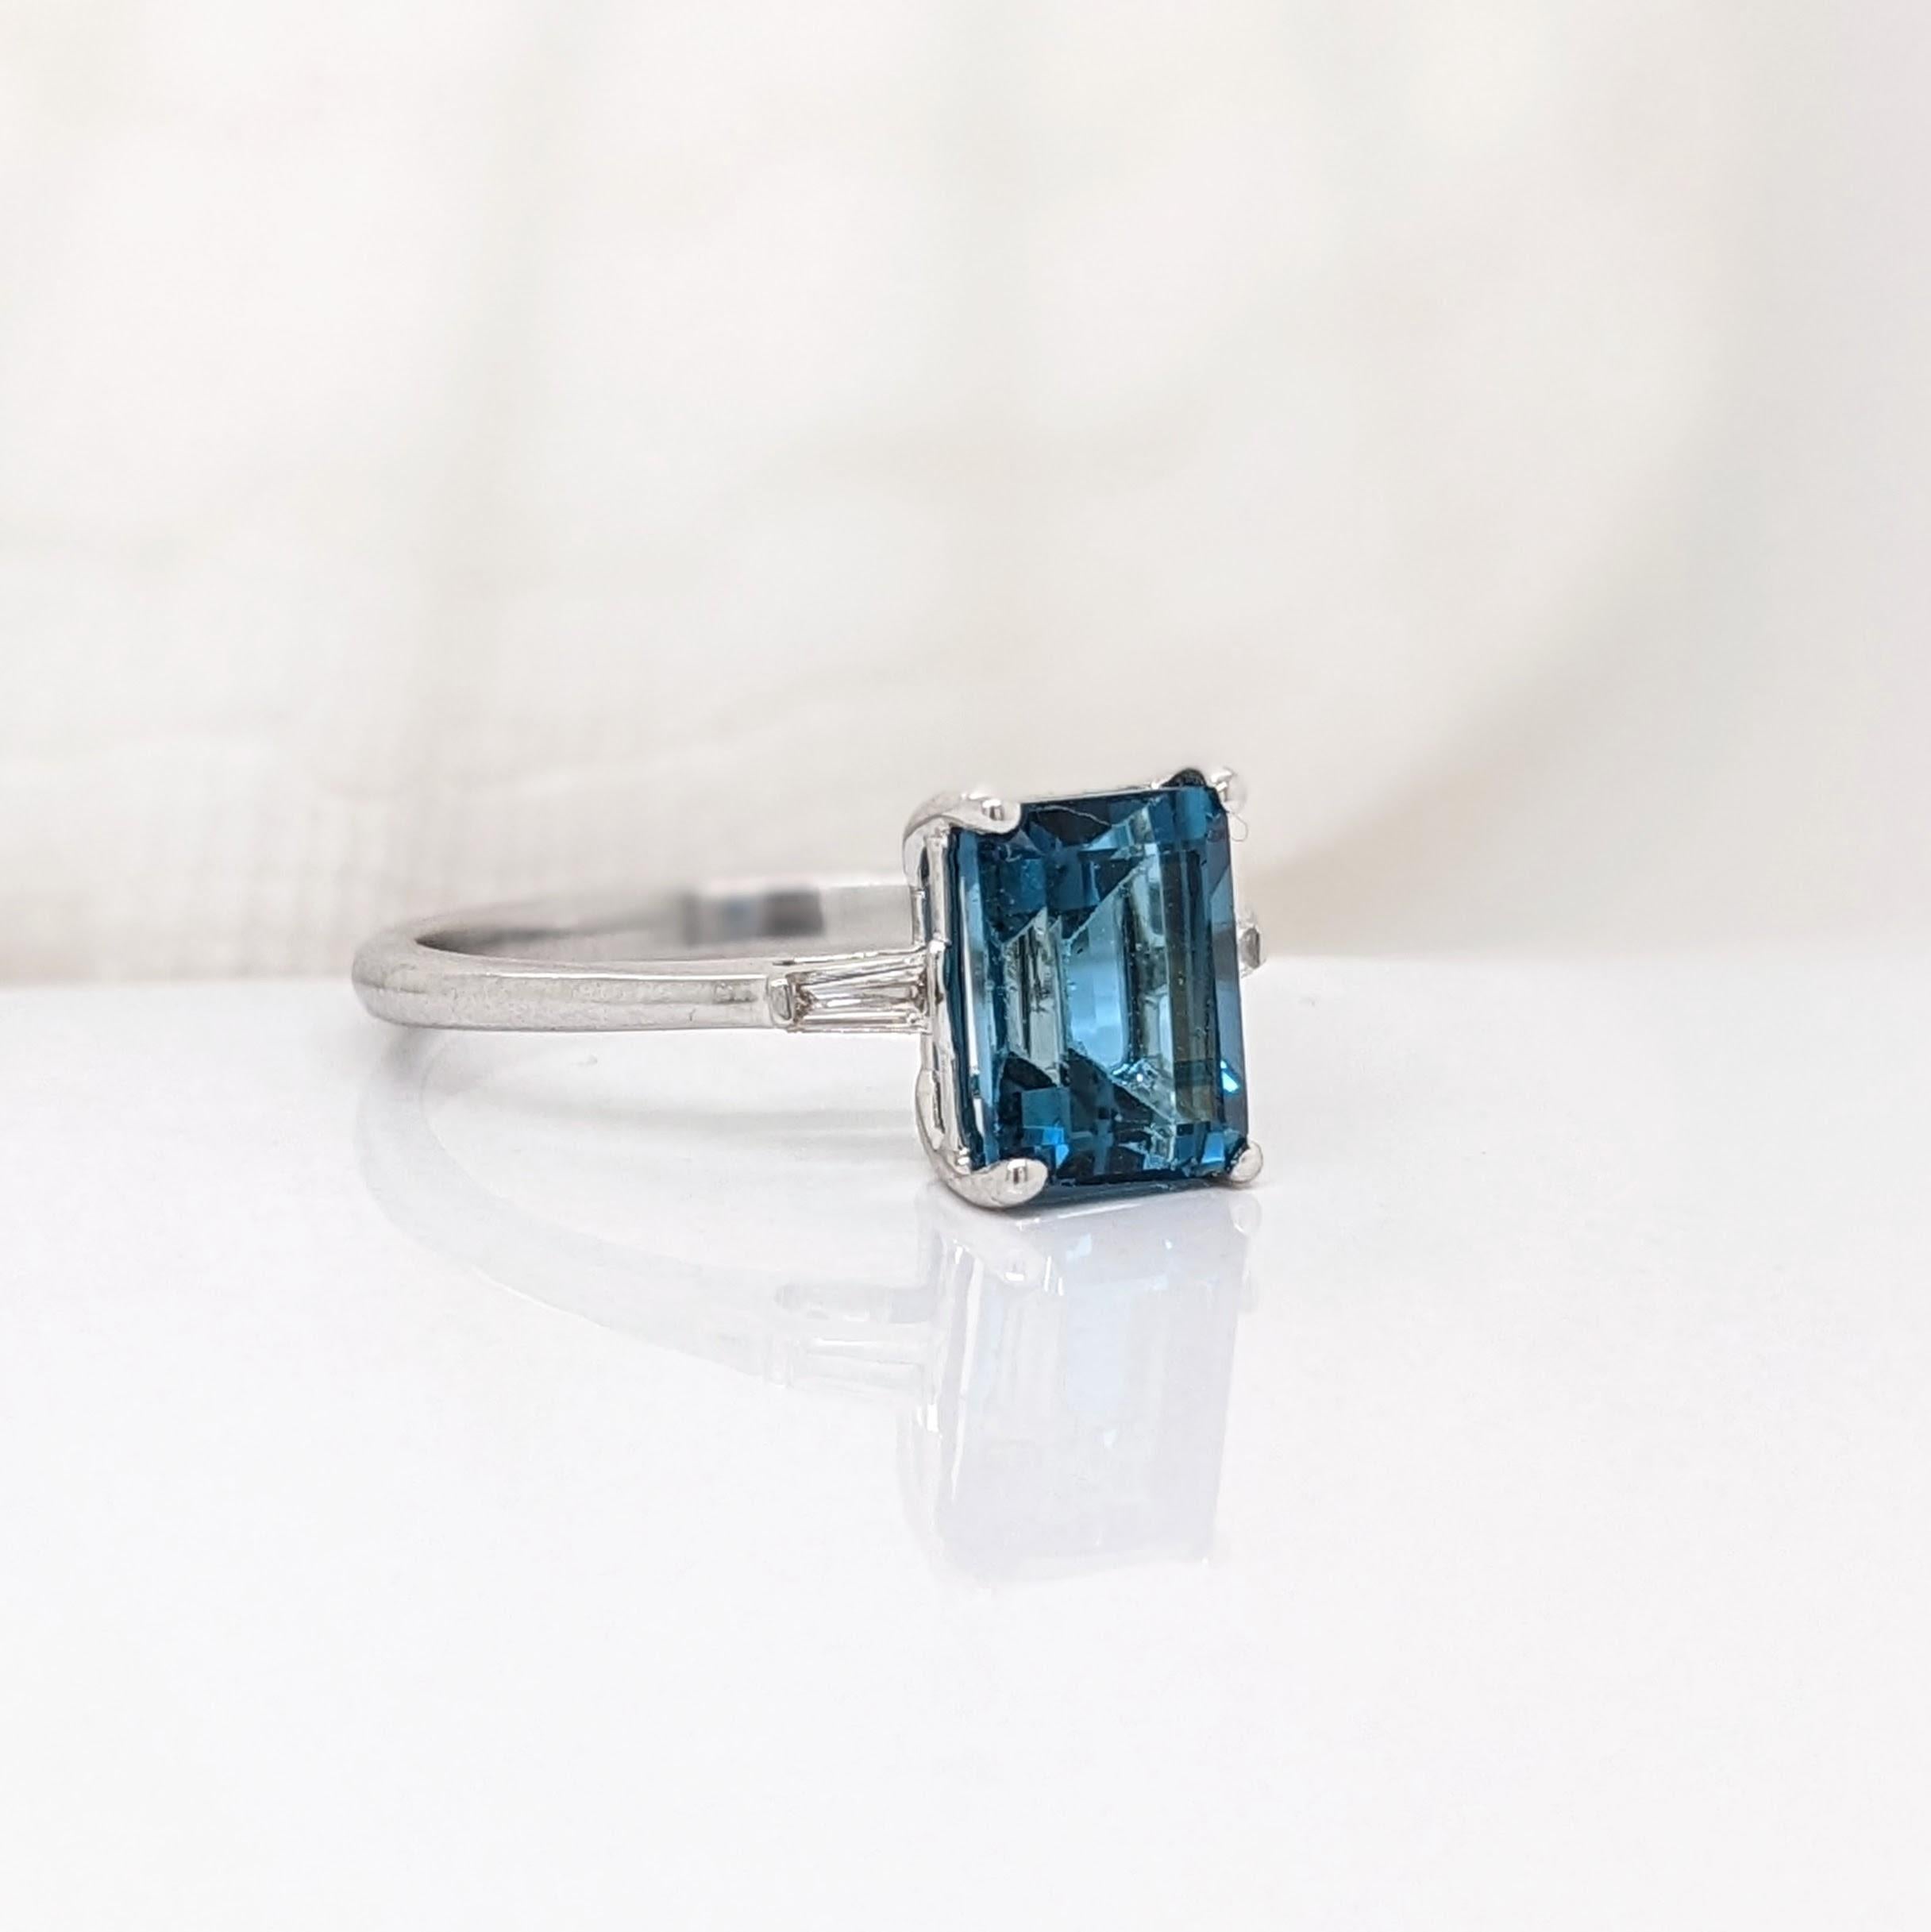 2.3ct London Blue Topaz Ring w Earth Mined Diamonds in Solid 14K Gold EM 8x6mm For Sale 1